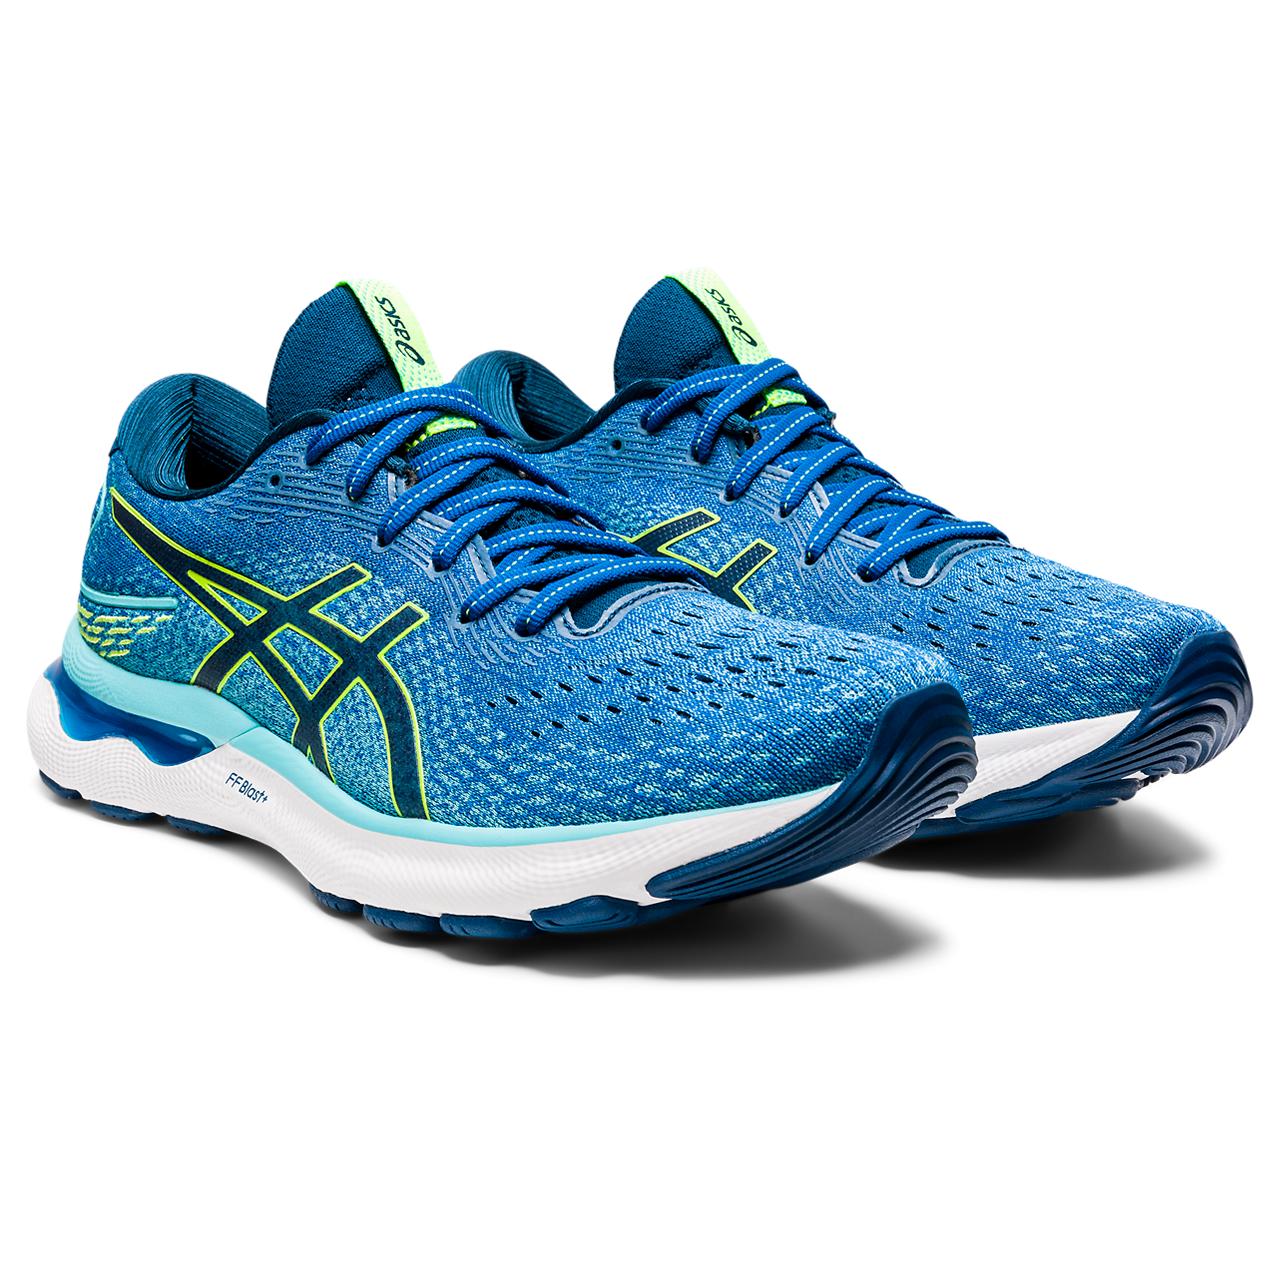 This light bliue colorway of the Men's ASICS Nimbus has an athletic vibe